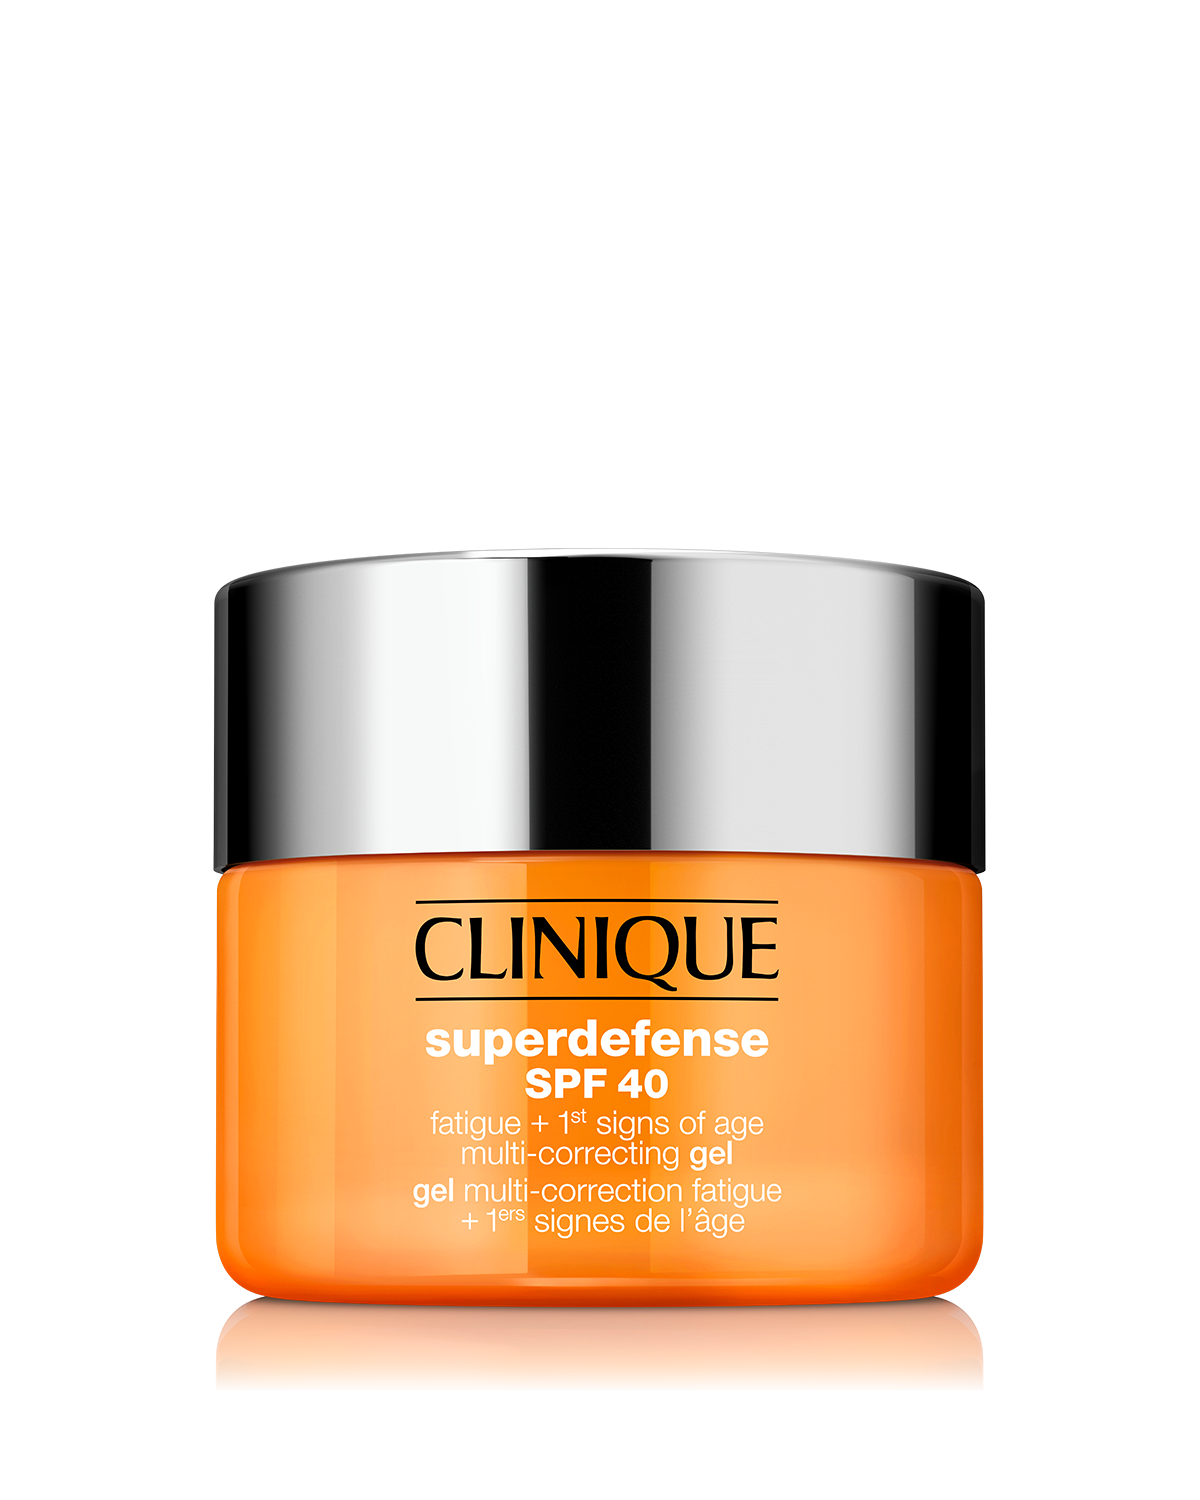 Superdefense SPF40 Fatigue + 1st Signs of Age Multi Correcting Gel